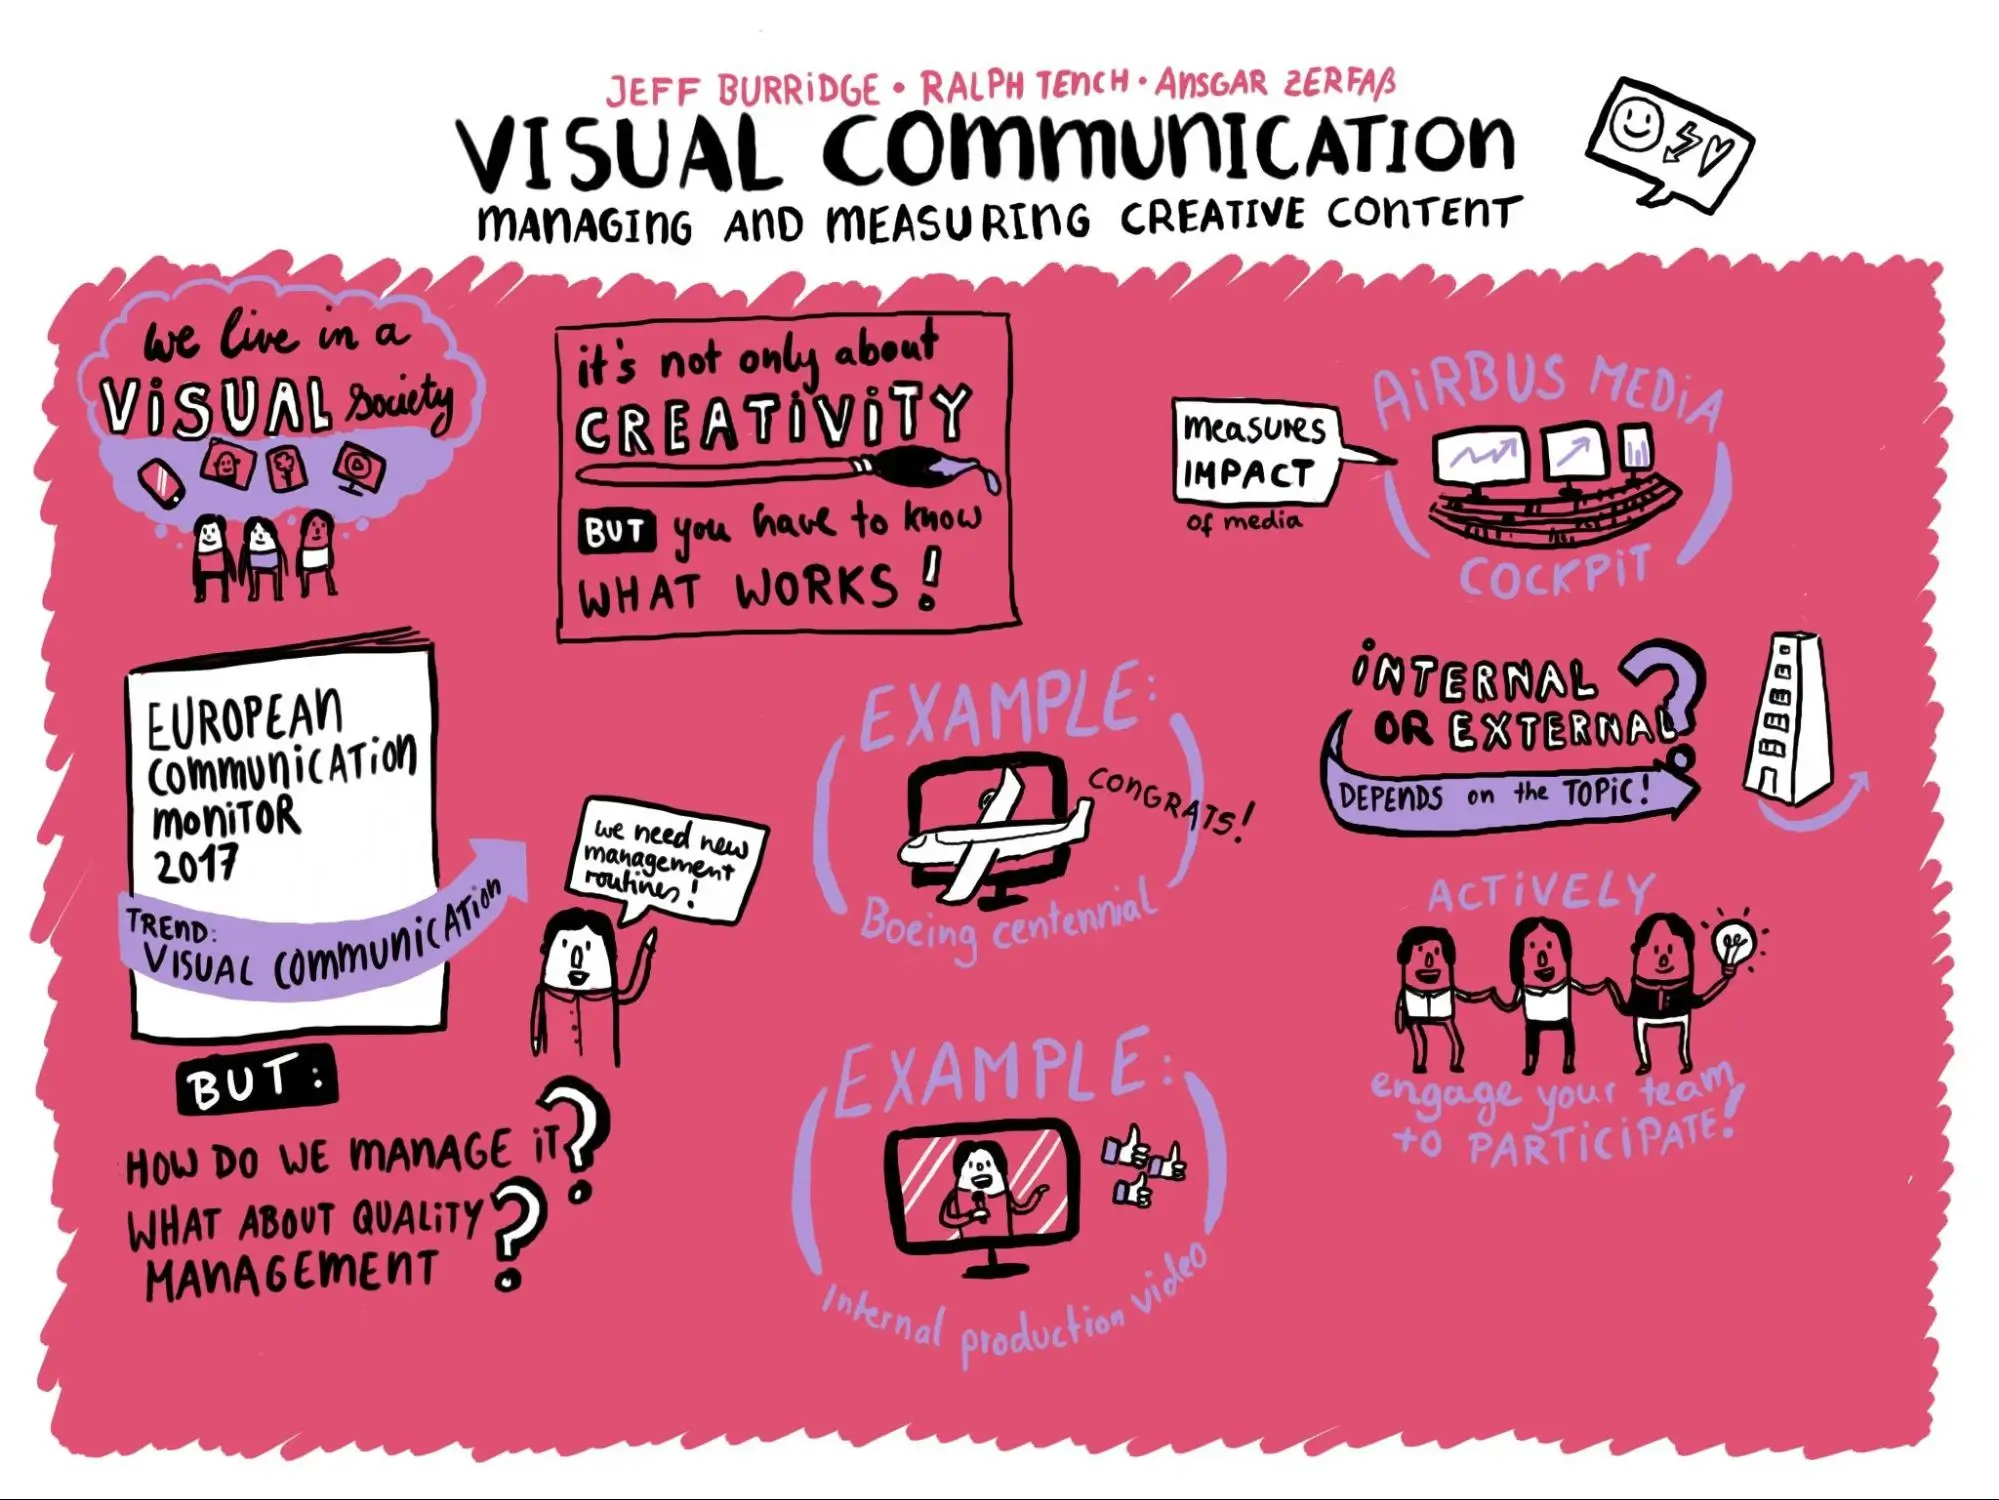 Visual Communication Uses in Shaping Spaces & Experiences